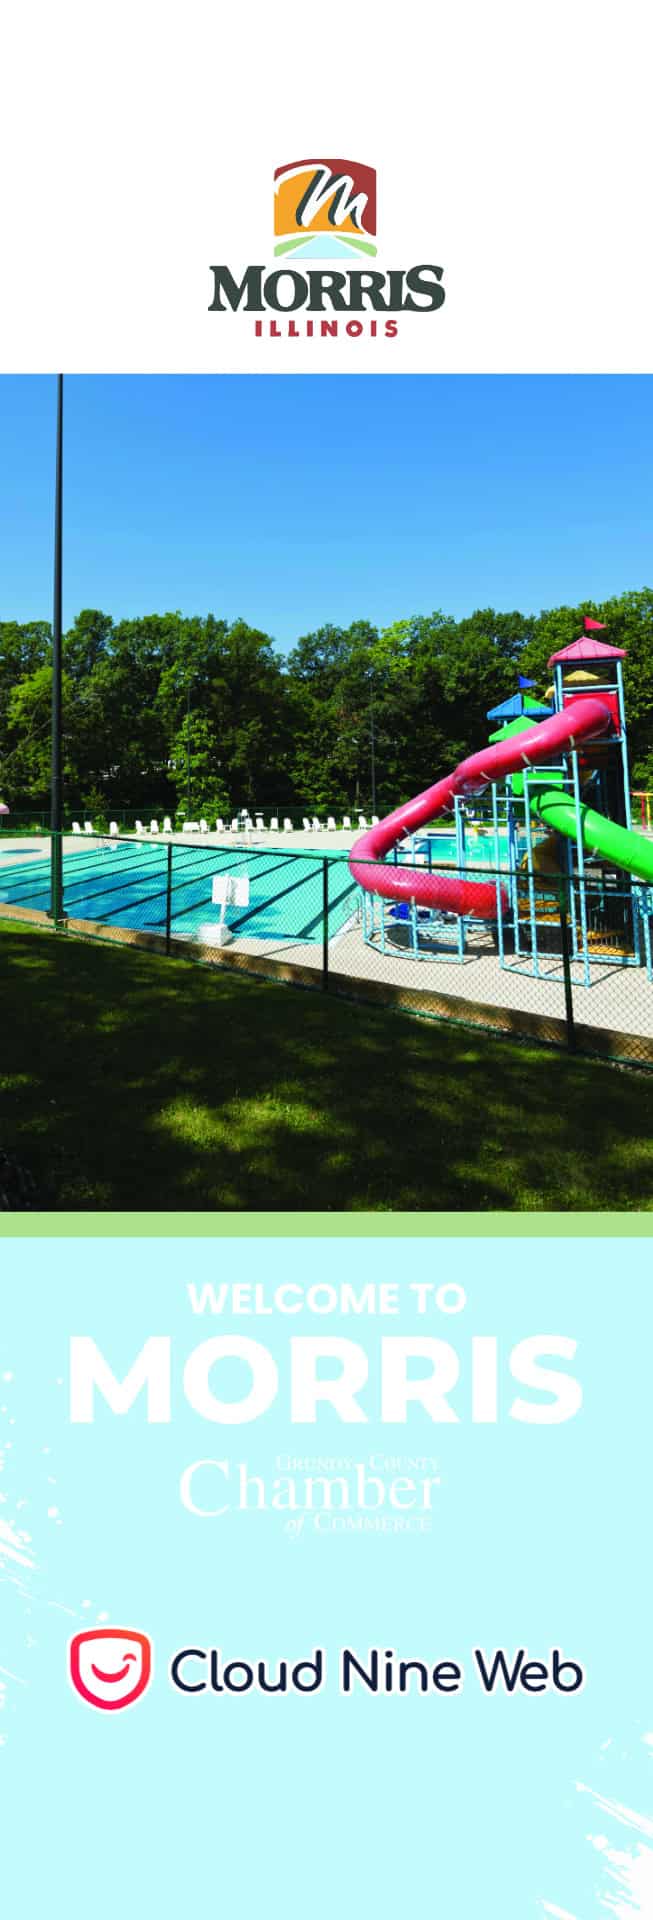 Morris, Illinois outdoor community pool with water slide.